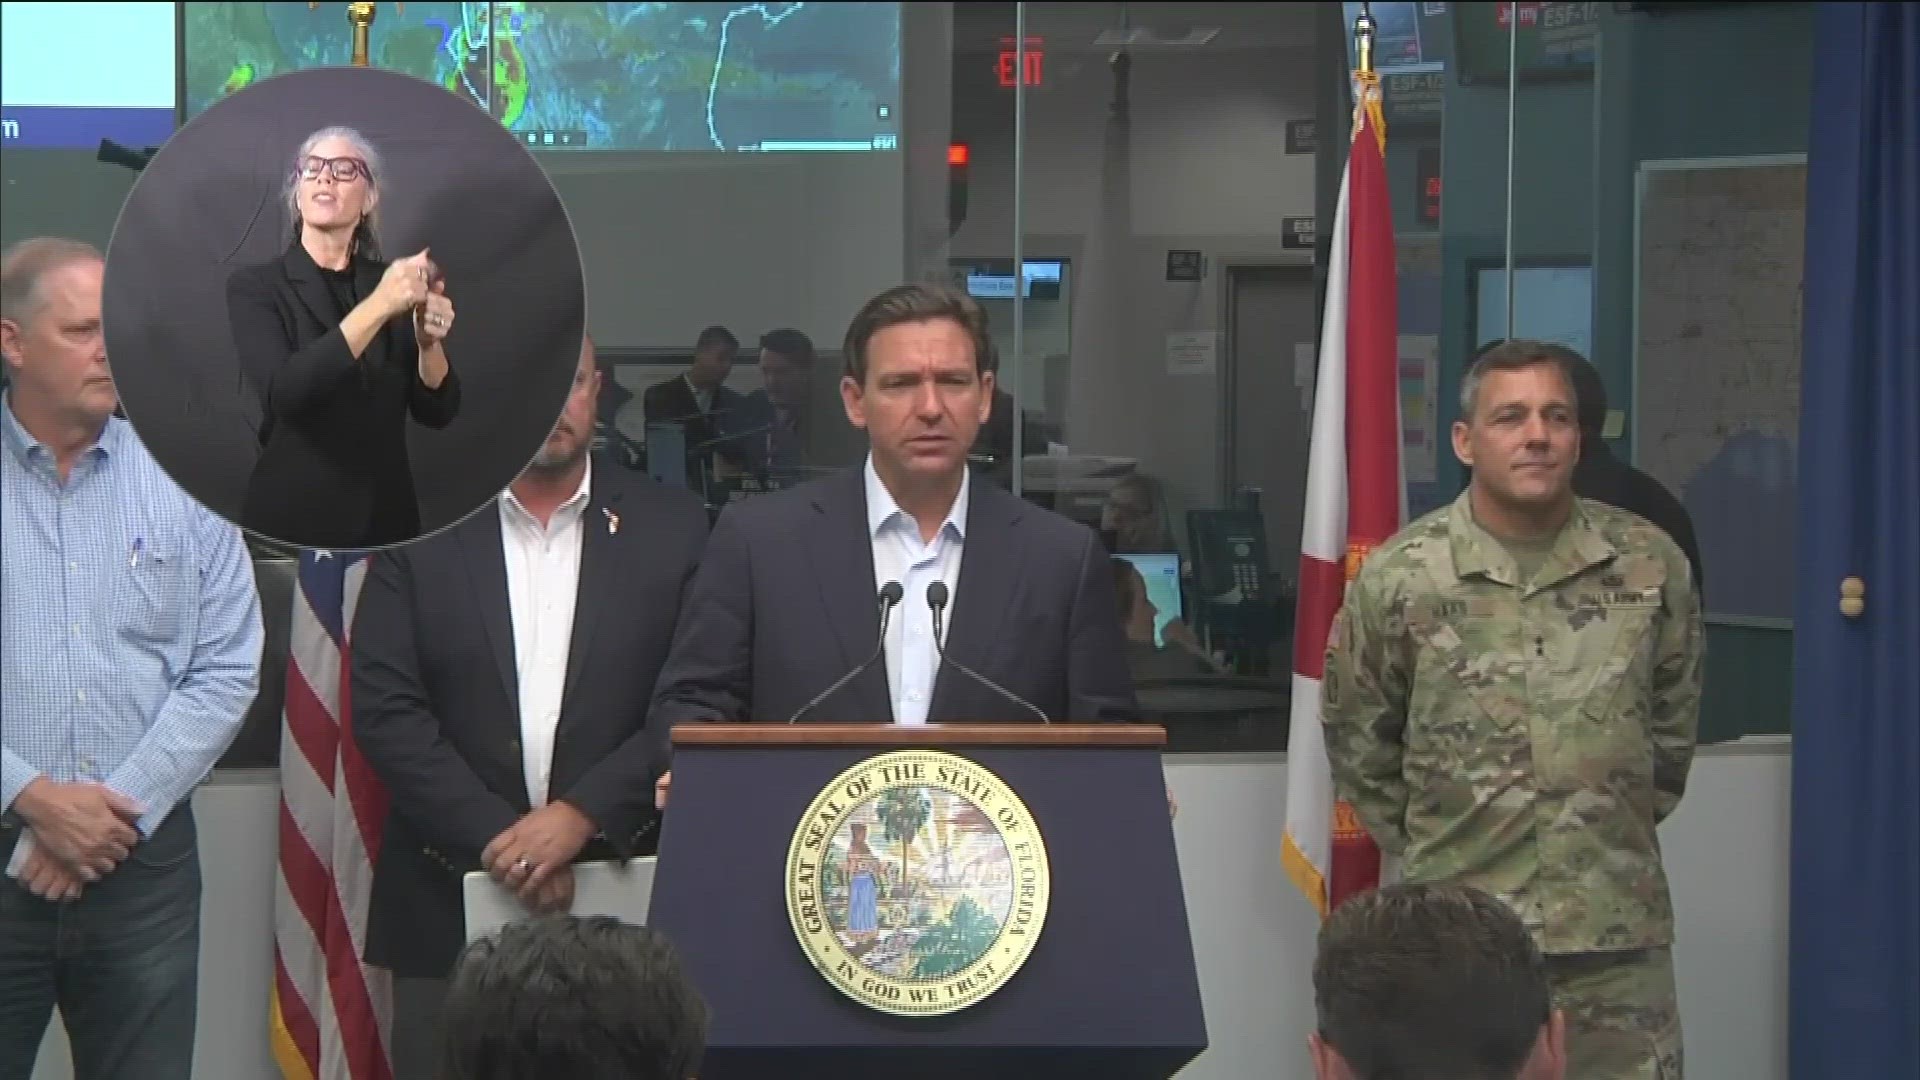 Gov. DeSantis said Monday that Edward Waters University will get $1 million for increased security and the Dollar General shooting victims' families will get $100K.